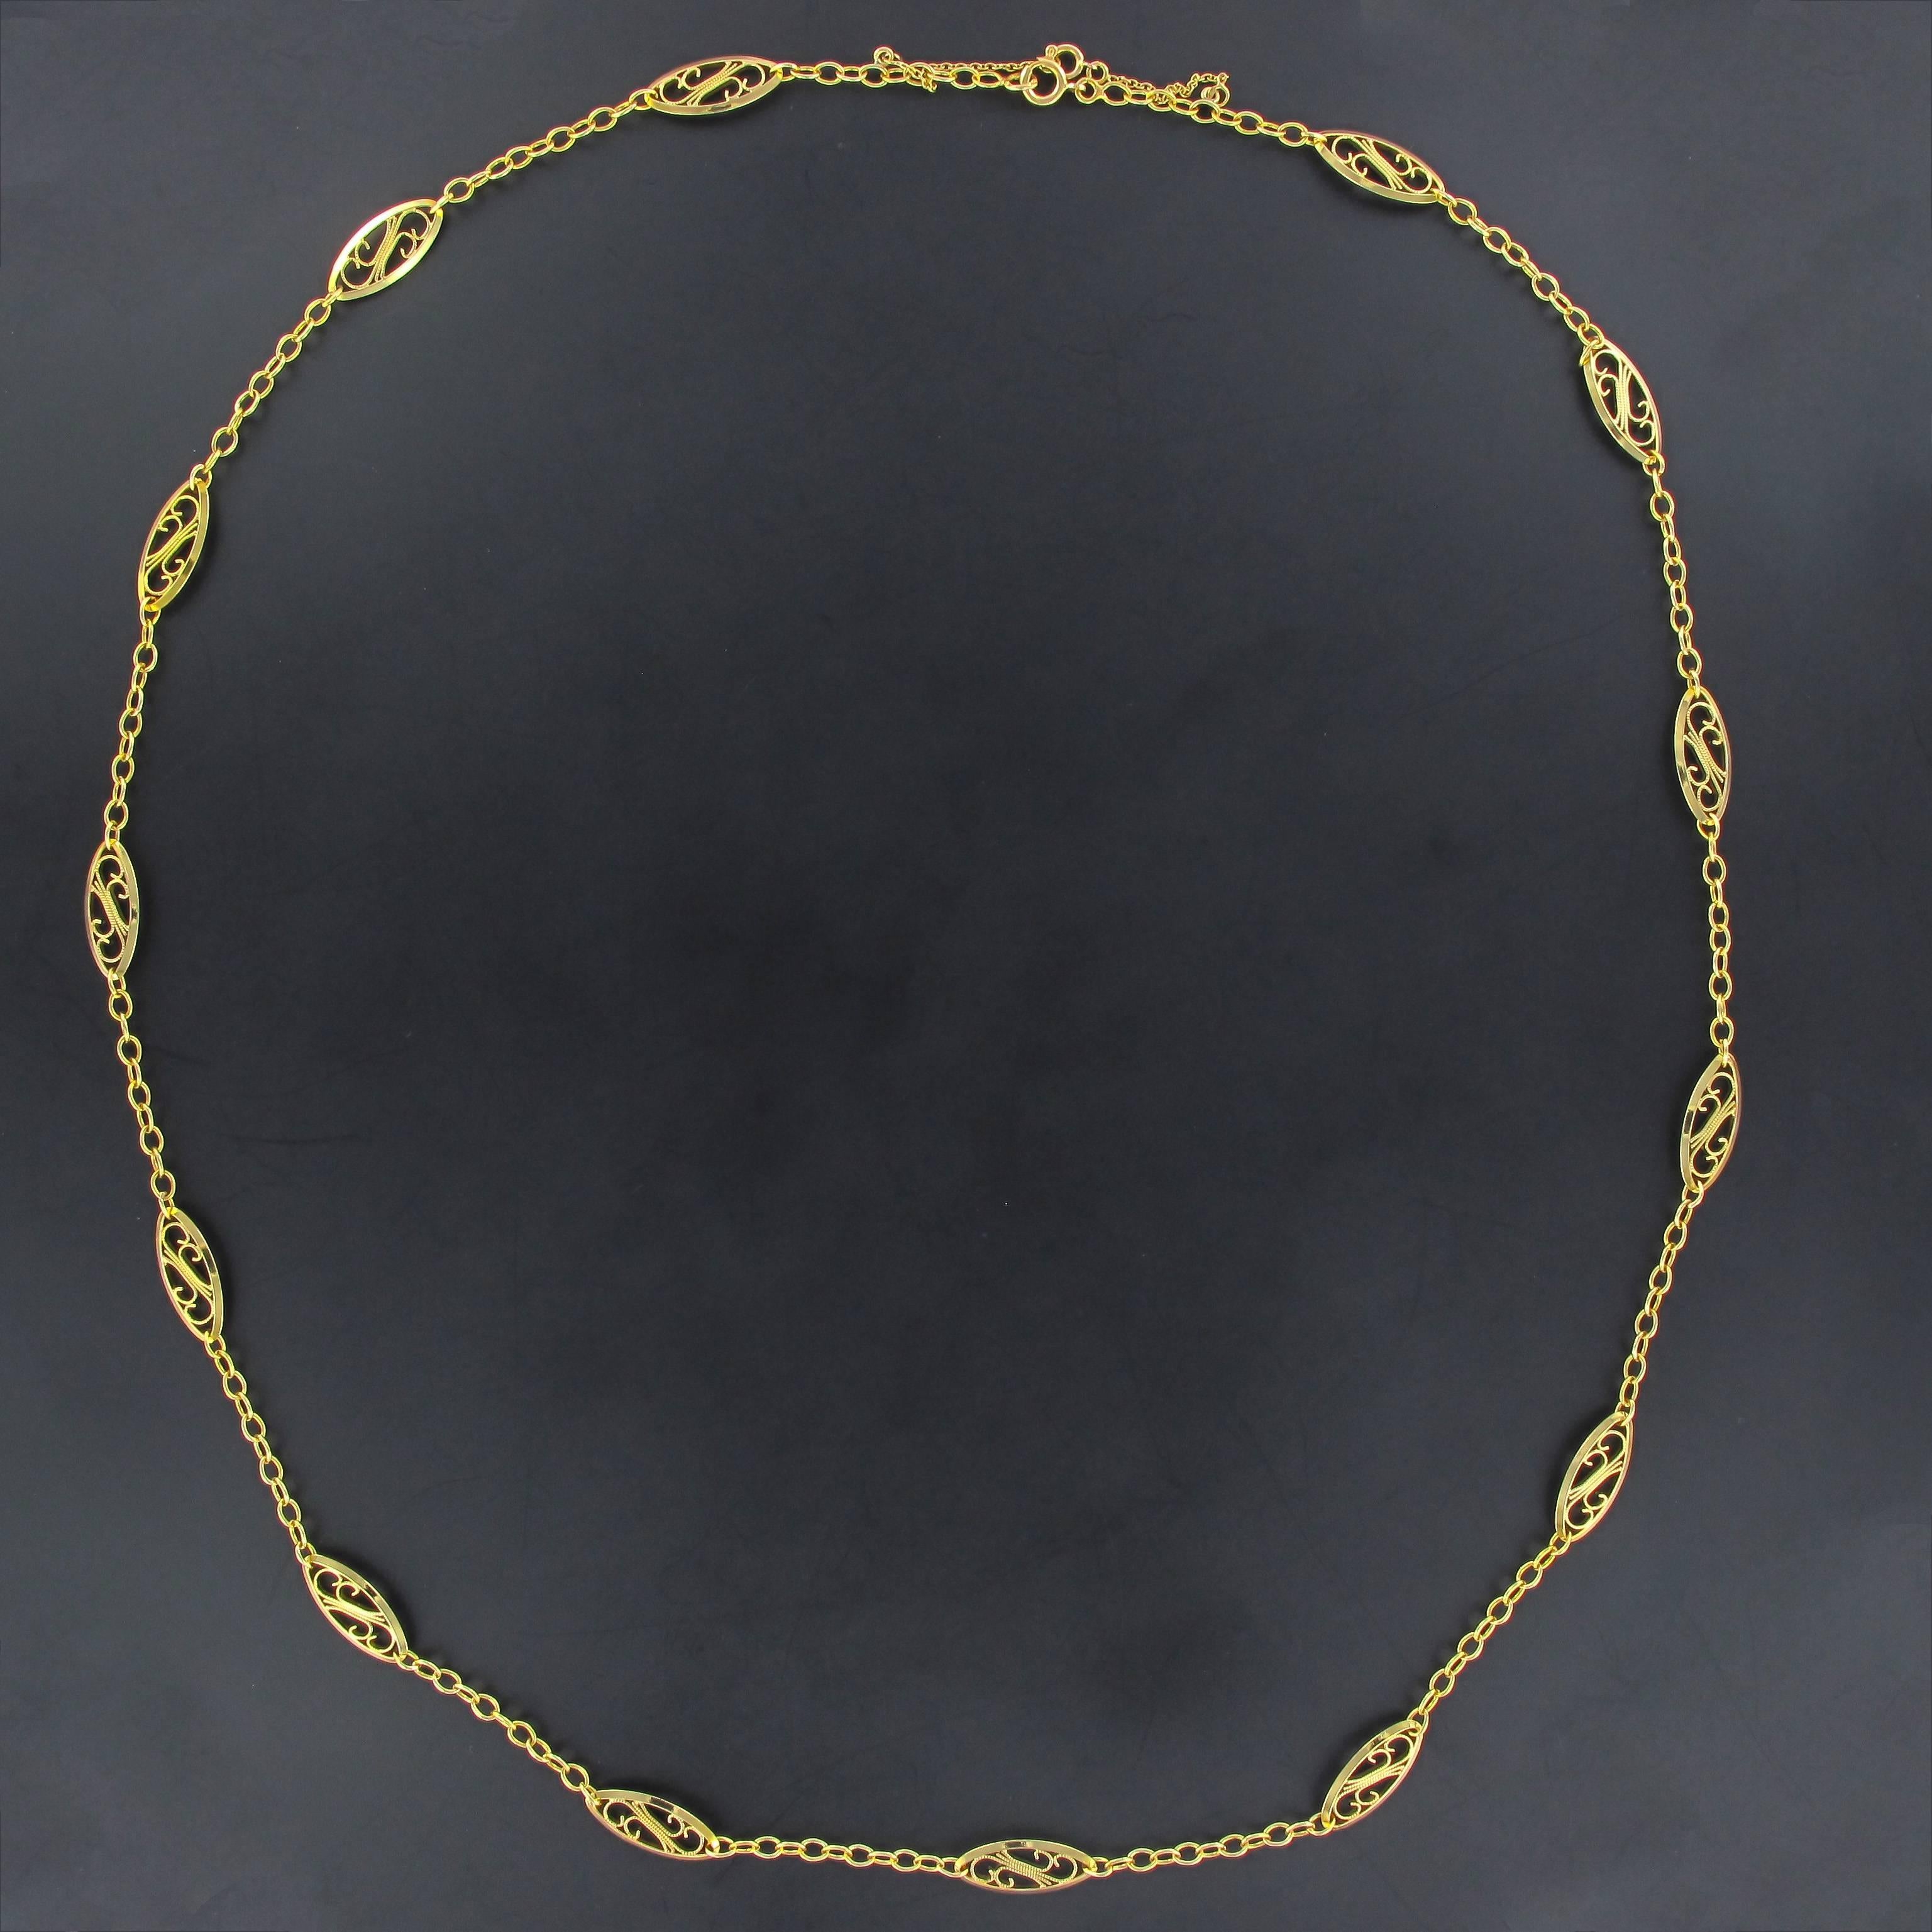 18 carat yellow gold necklace, eagle head hallmark.

This gorgeous antique necklace is composed of openwork shuttle shaped links of a filigree design separated by fine belcher chain. The clasp is in the form of a spring ring with a safety chain.